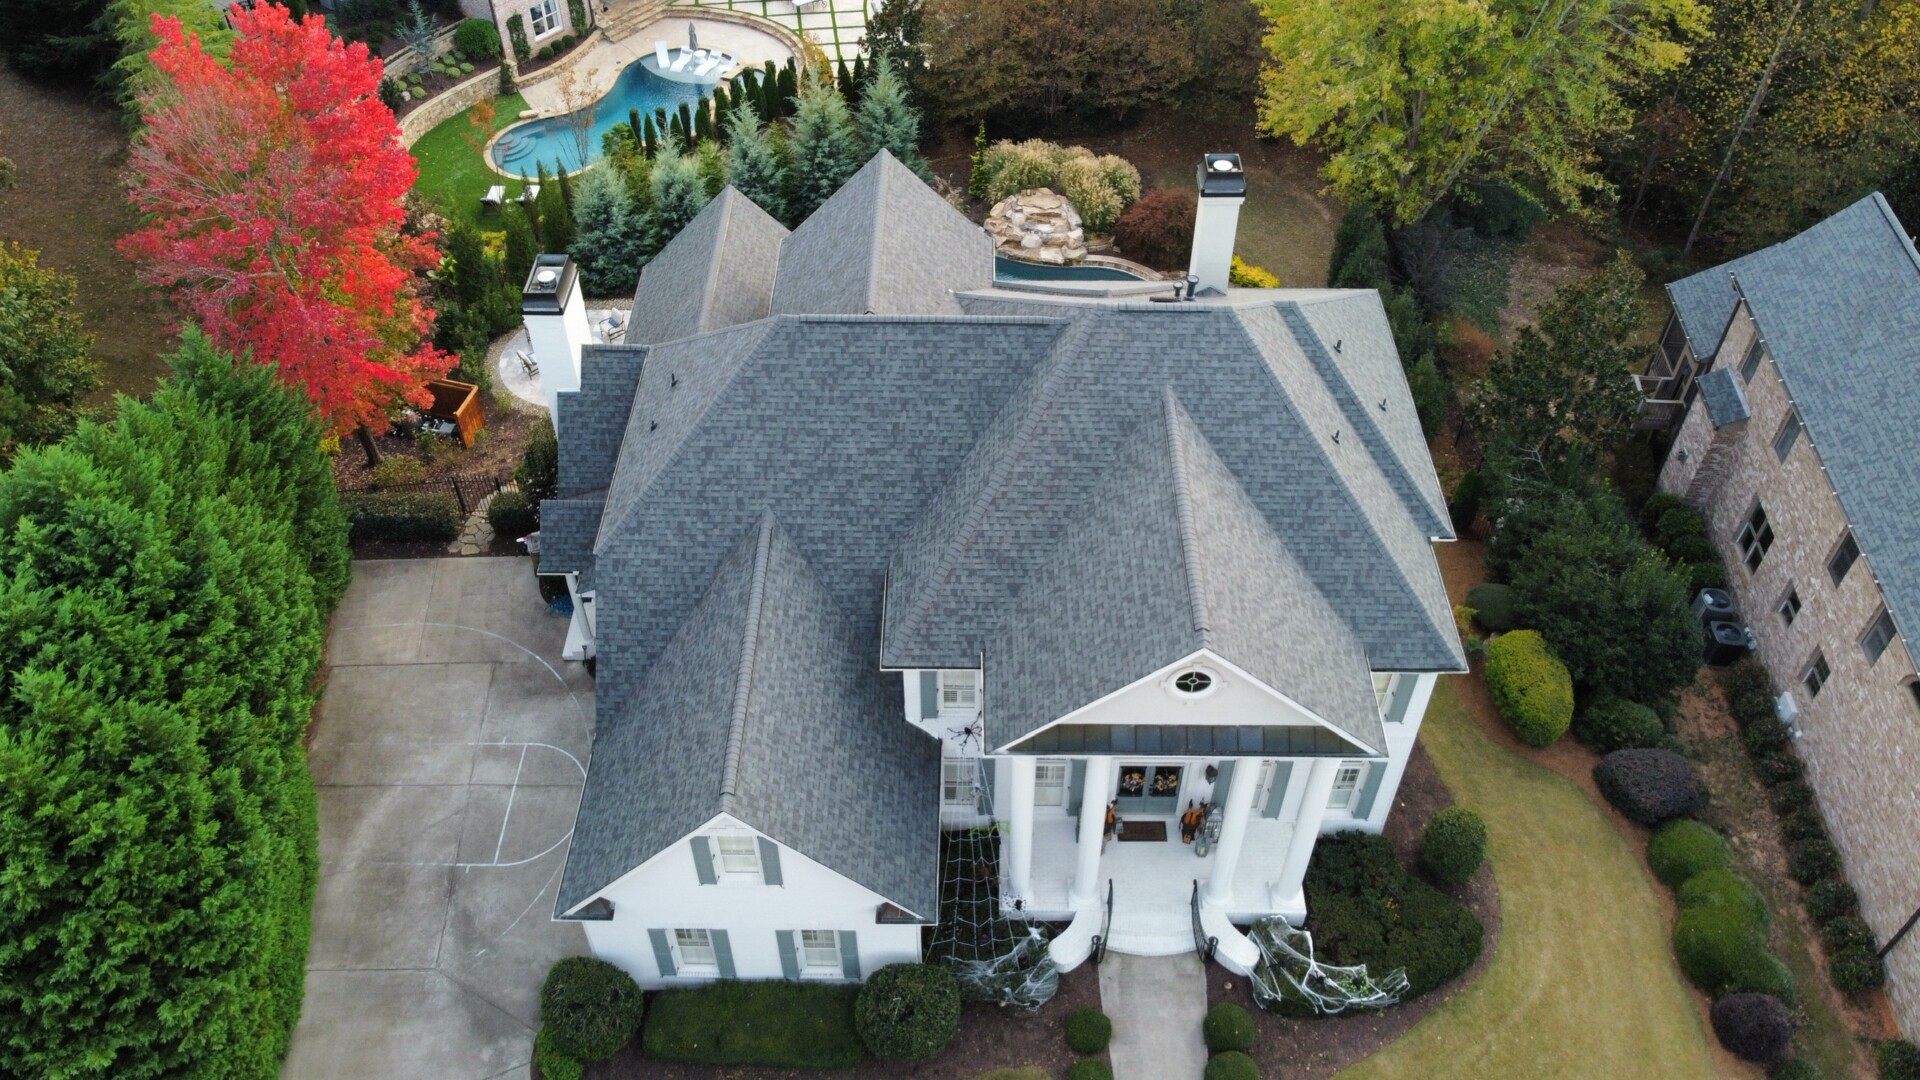 An aerial view of a home in a neighborhood.